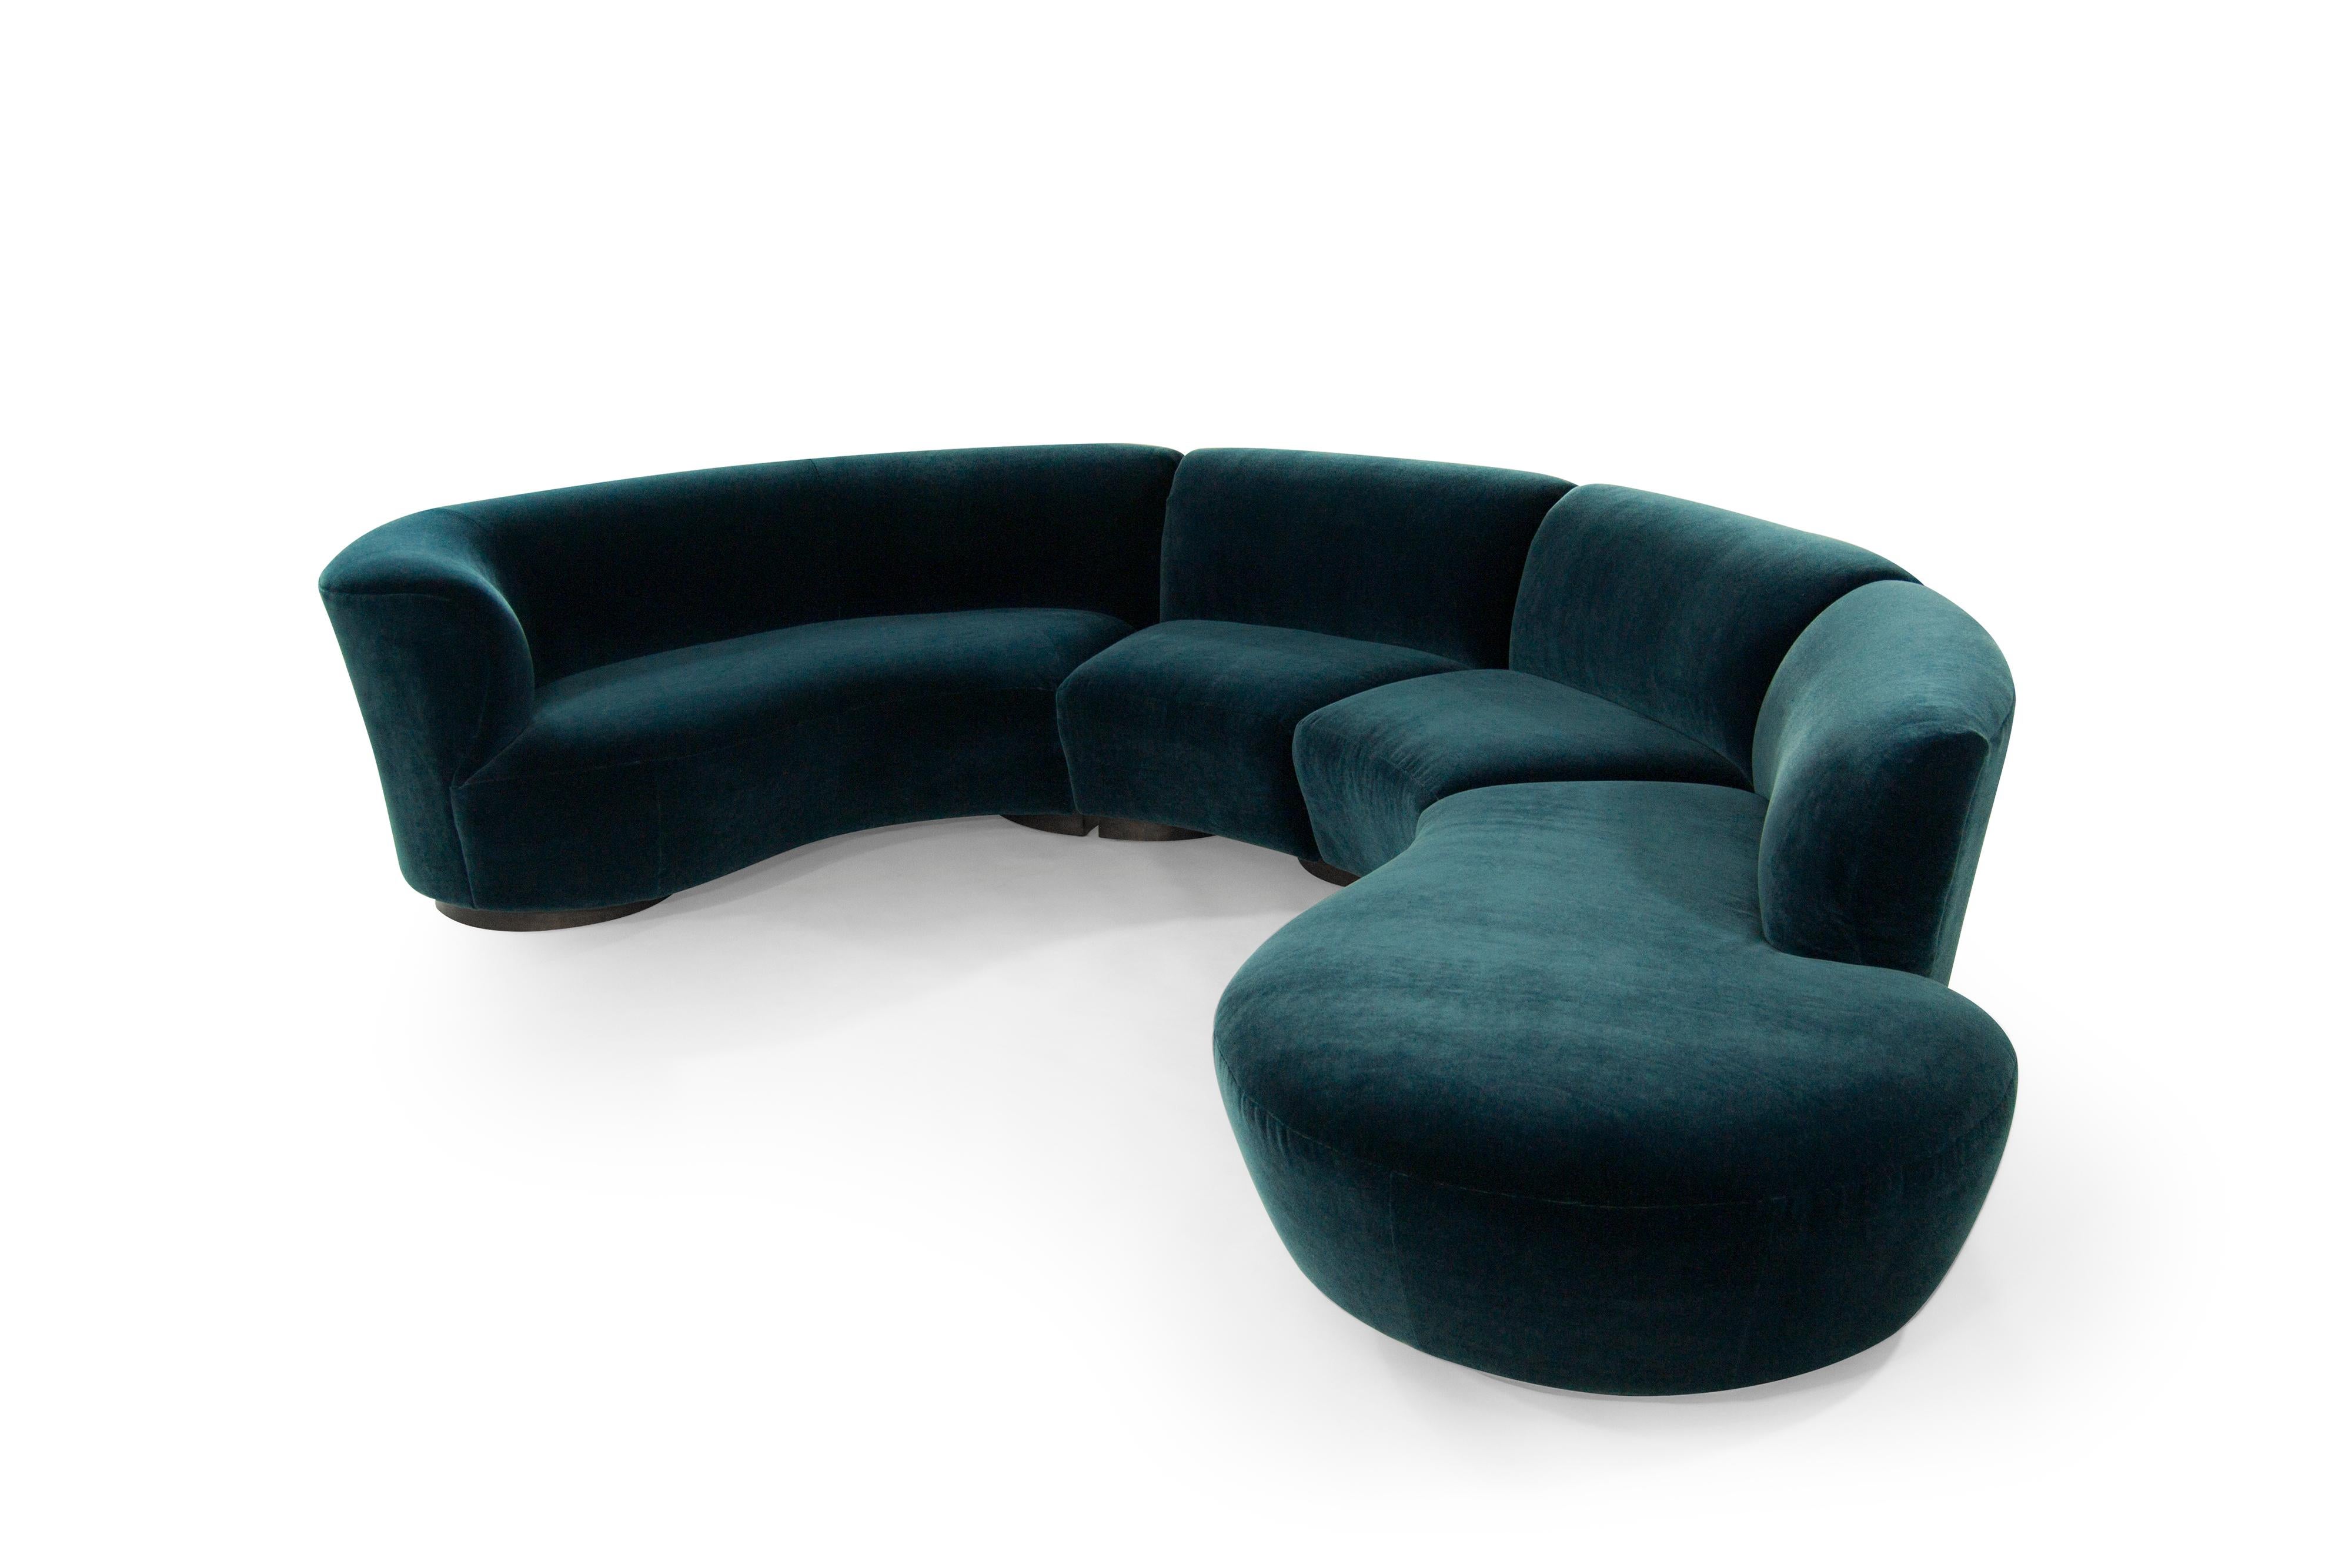 Mid-Century Modern Vladimir Kagan for Directional Sectional in Teal Mohair, circa 1970s